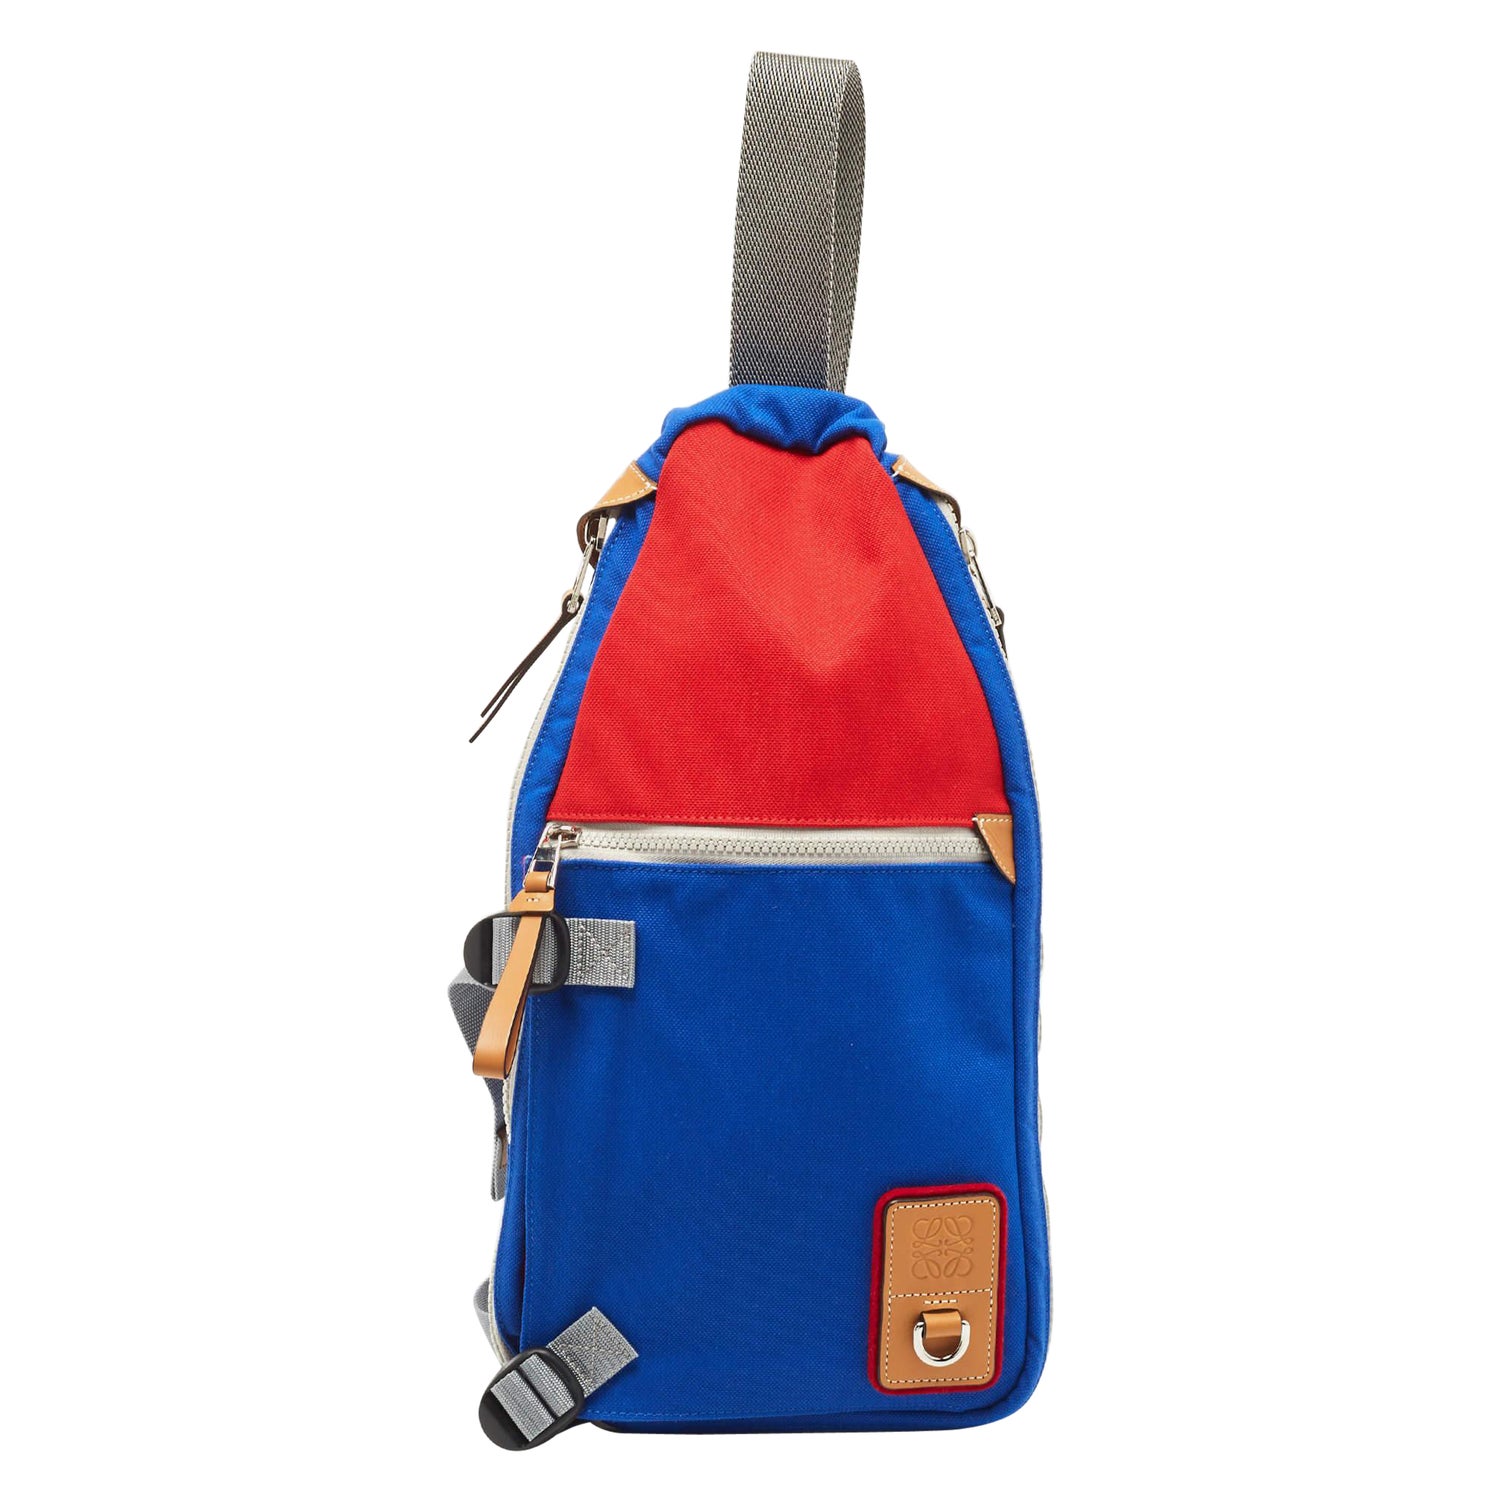 Discovery Backpack Monogram Other Canvas - Bags M22519